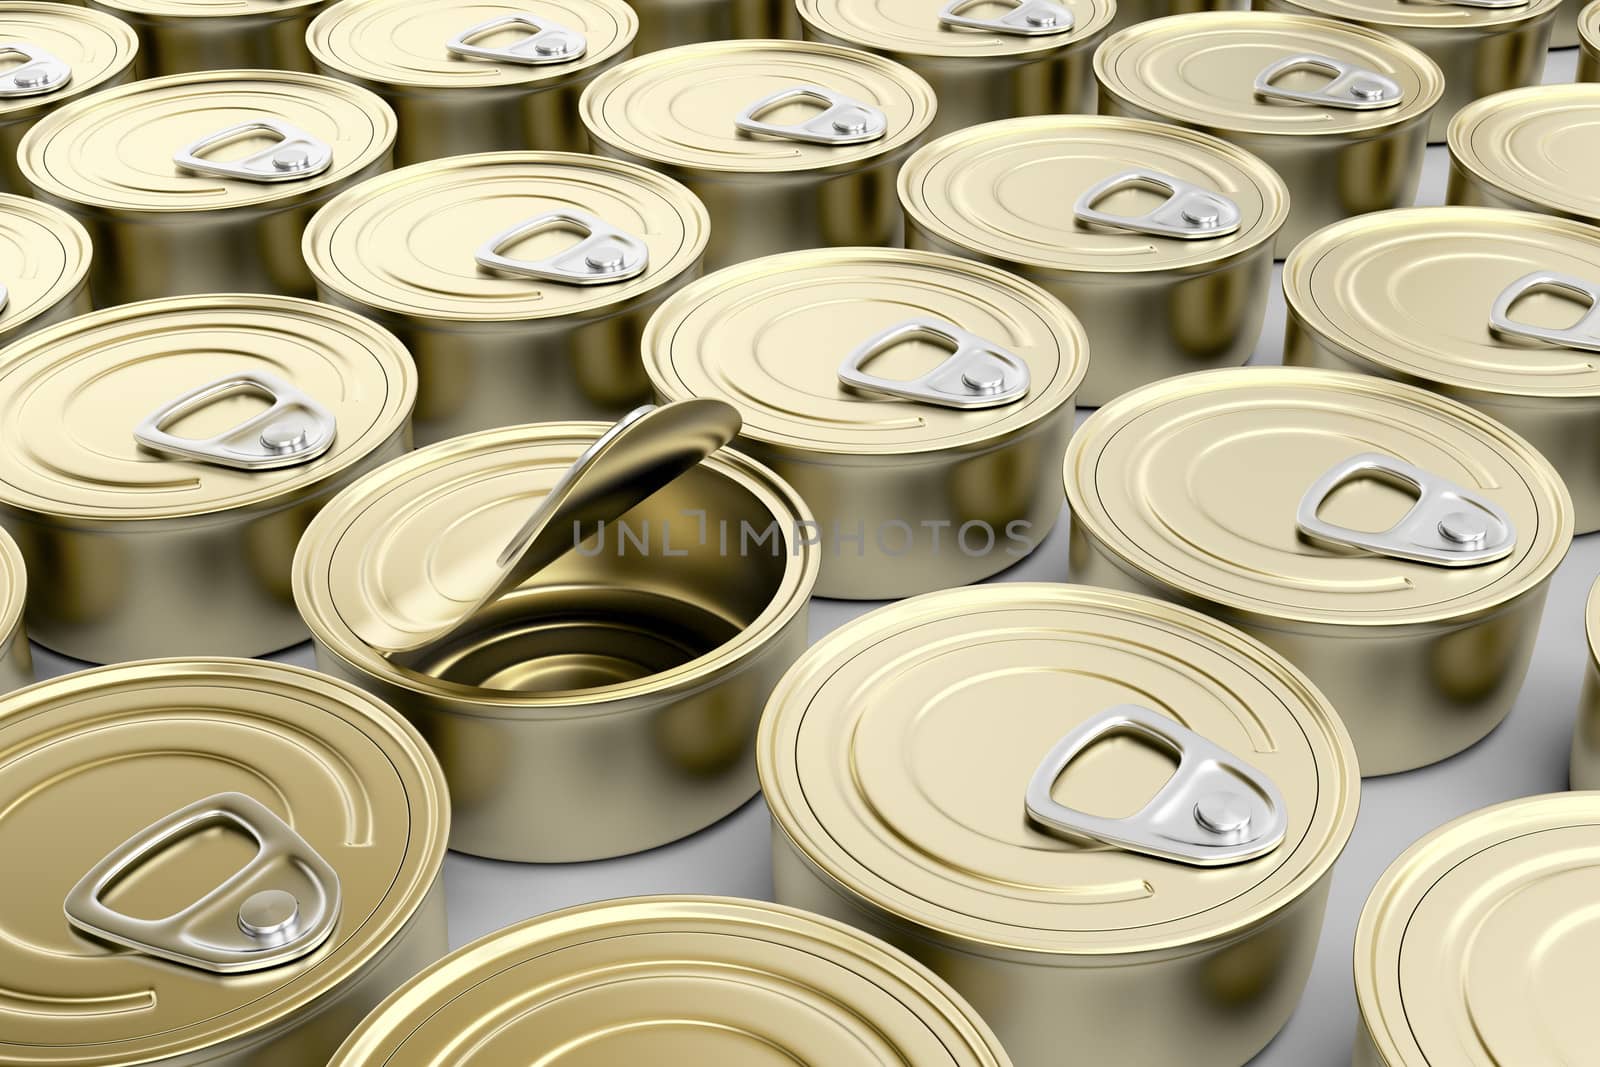 One defective tin can in multiple rows of tin cans